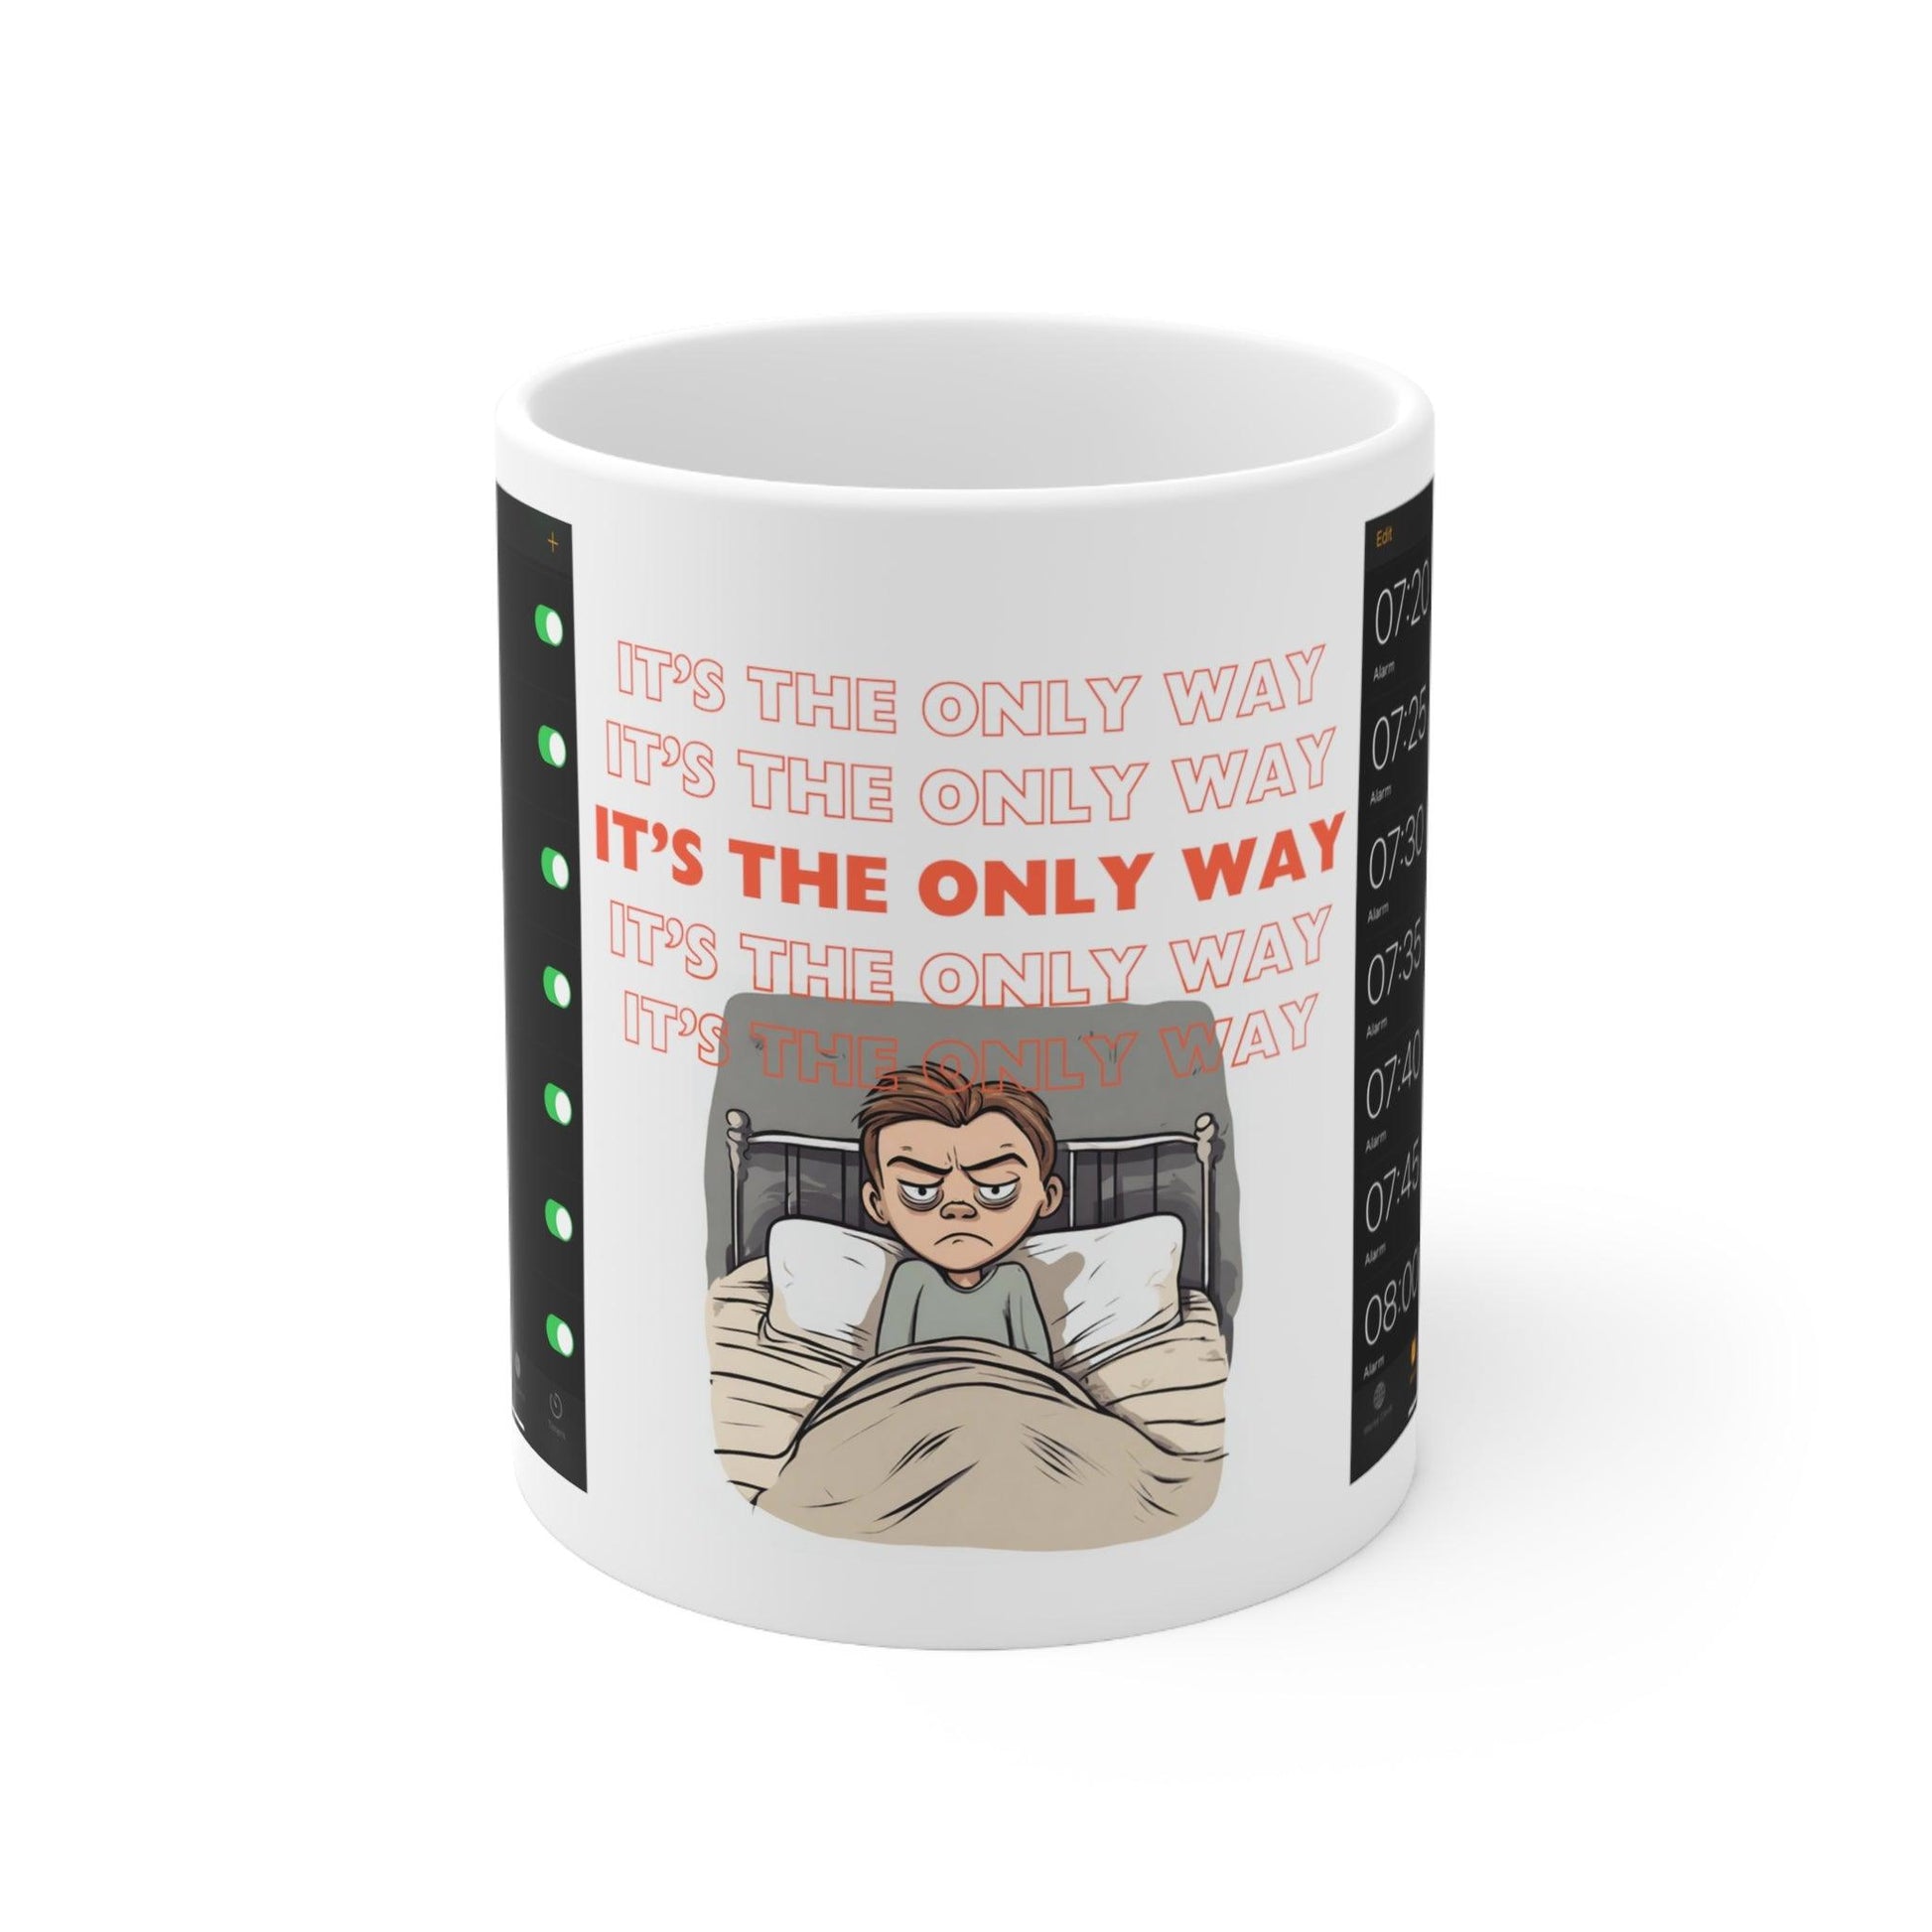 ADHD Alarm Habits Relatable Mug - 'The Only Way Up' Inspirational Cup - Fidget and Focus